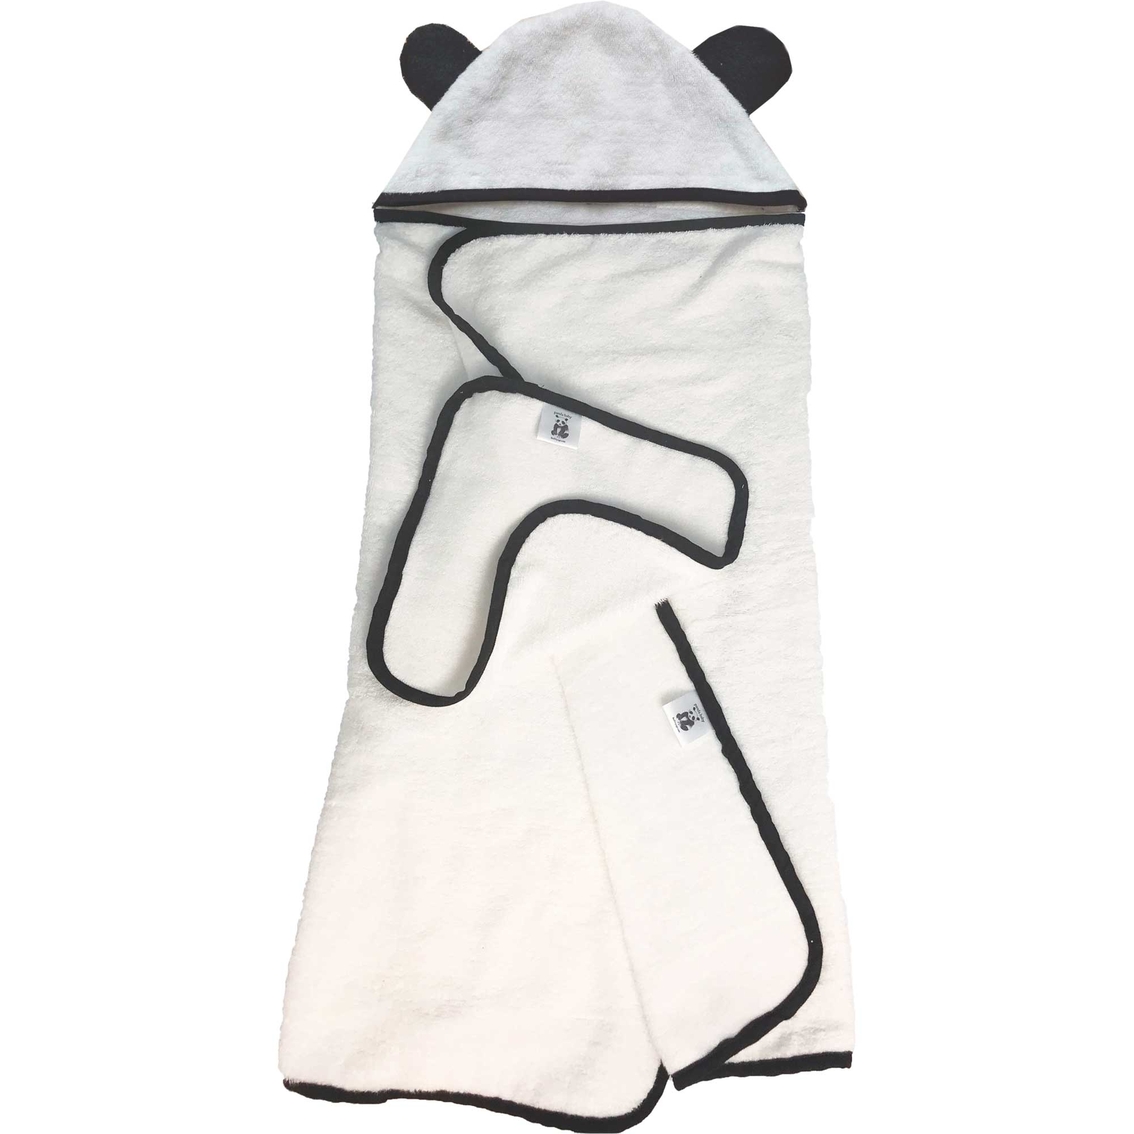 BedVoyage Hooded Towel and Washcloth 2 pc. Set - Image 2 of 6